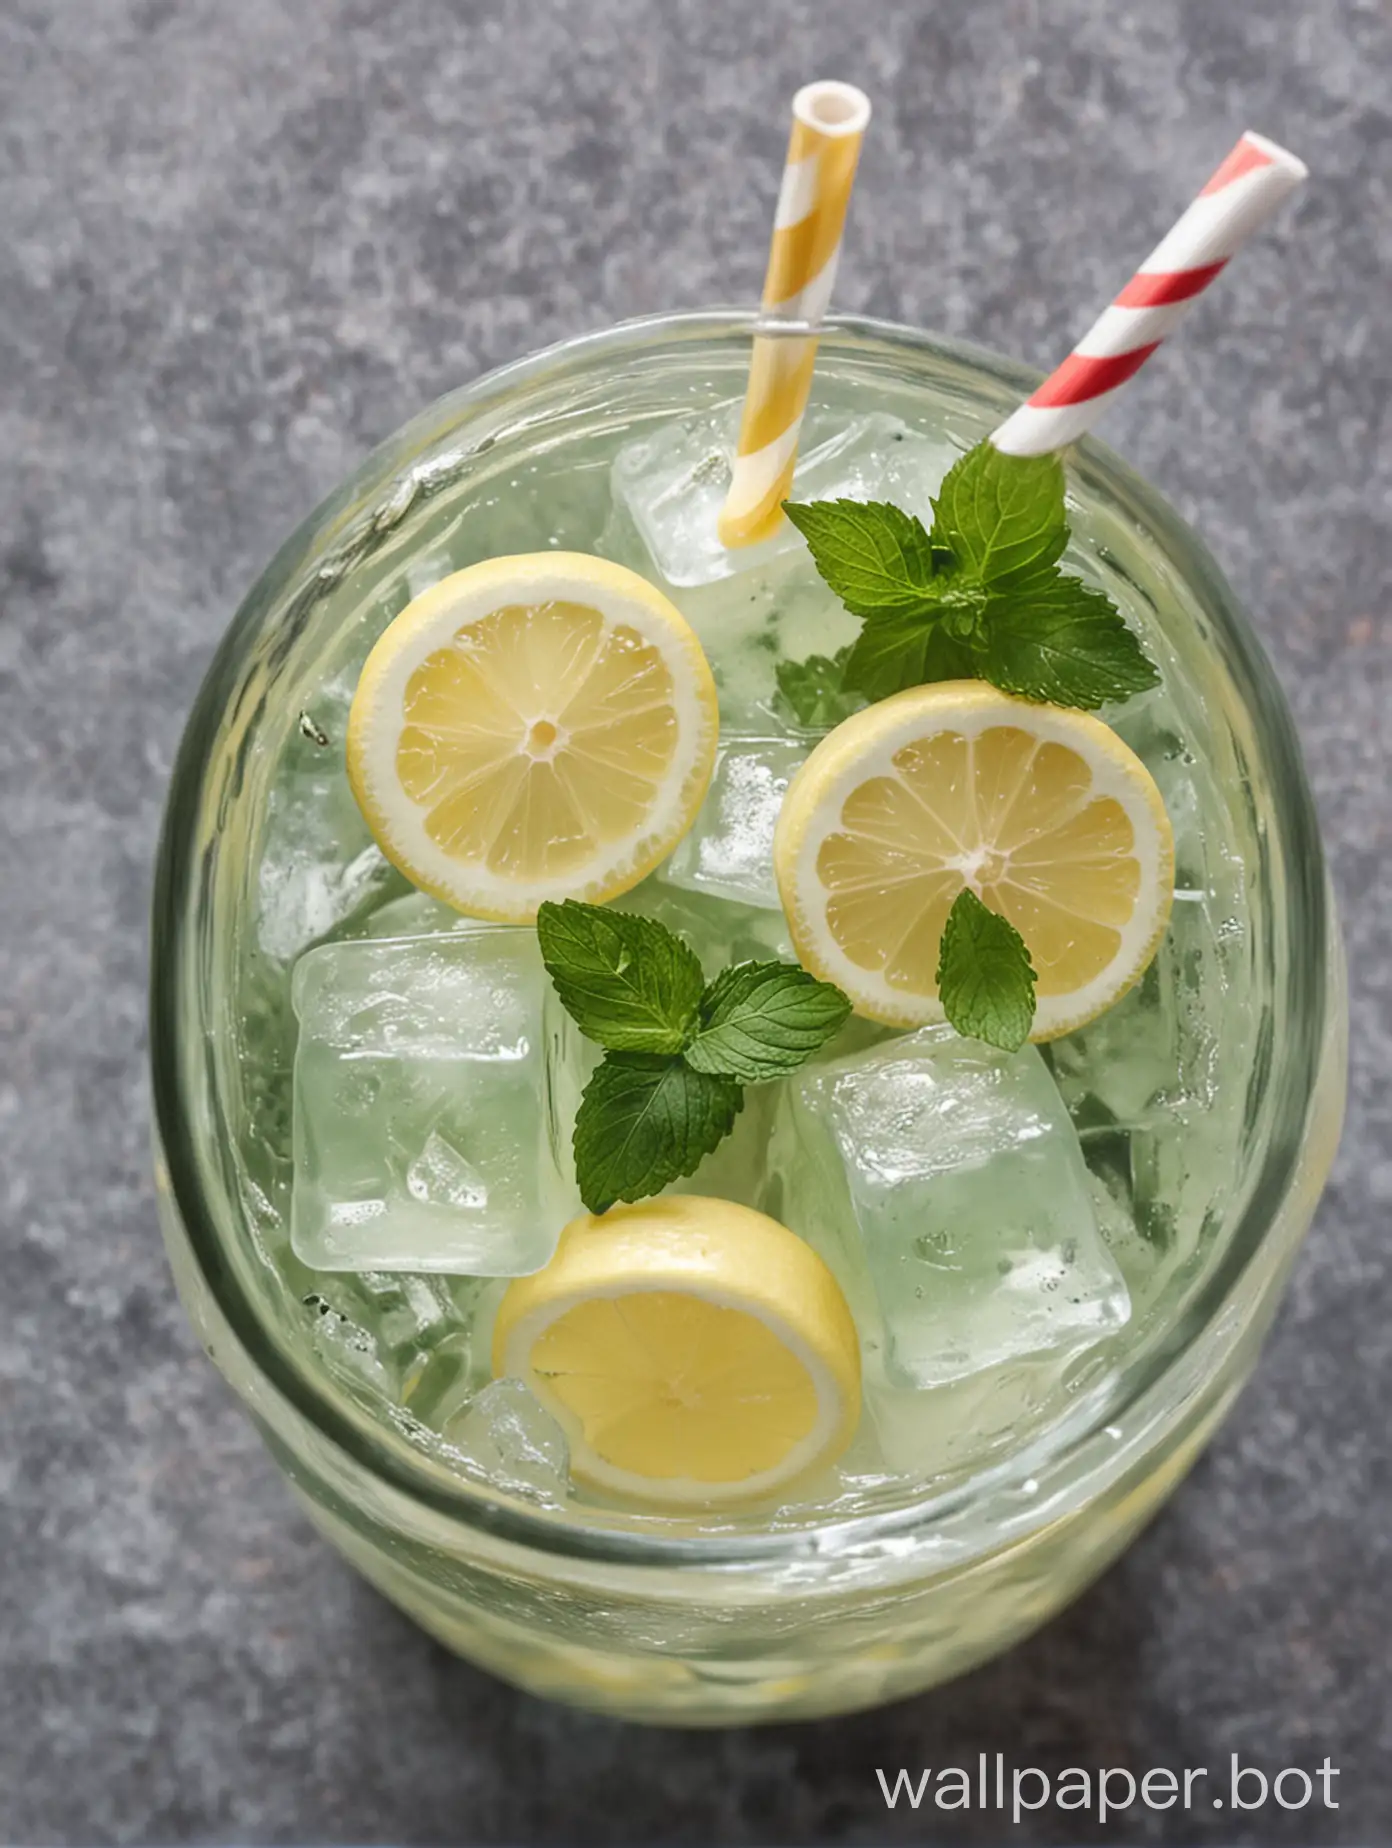 lemonade with mint ice cubes in a glass
with a straw view from the top
